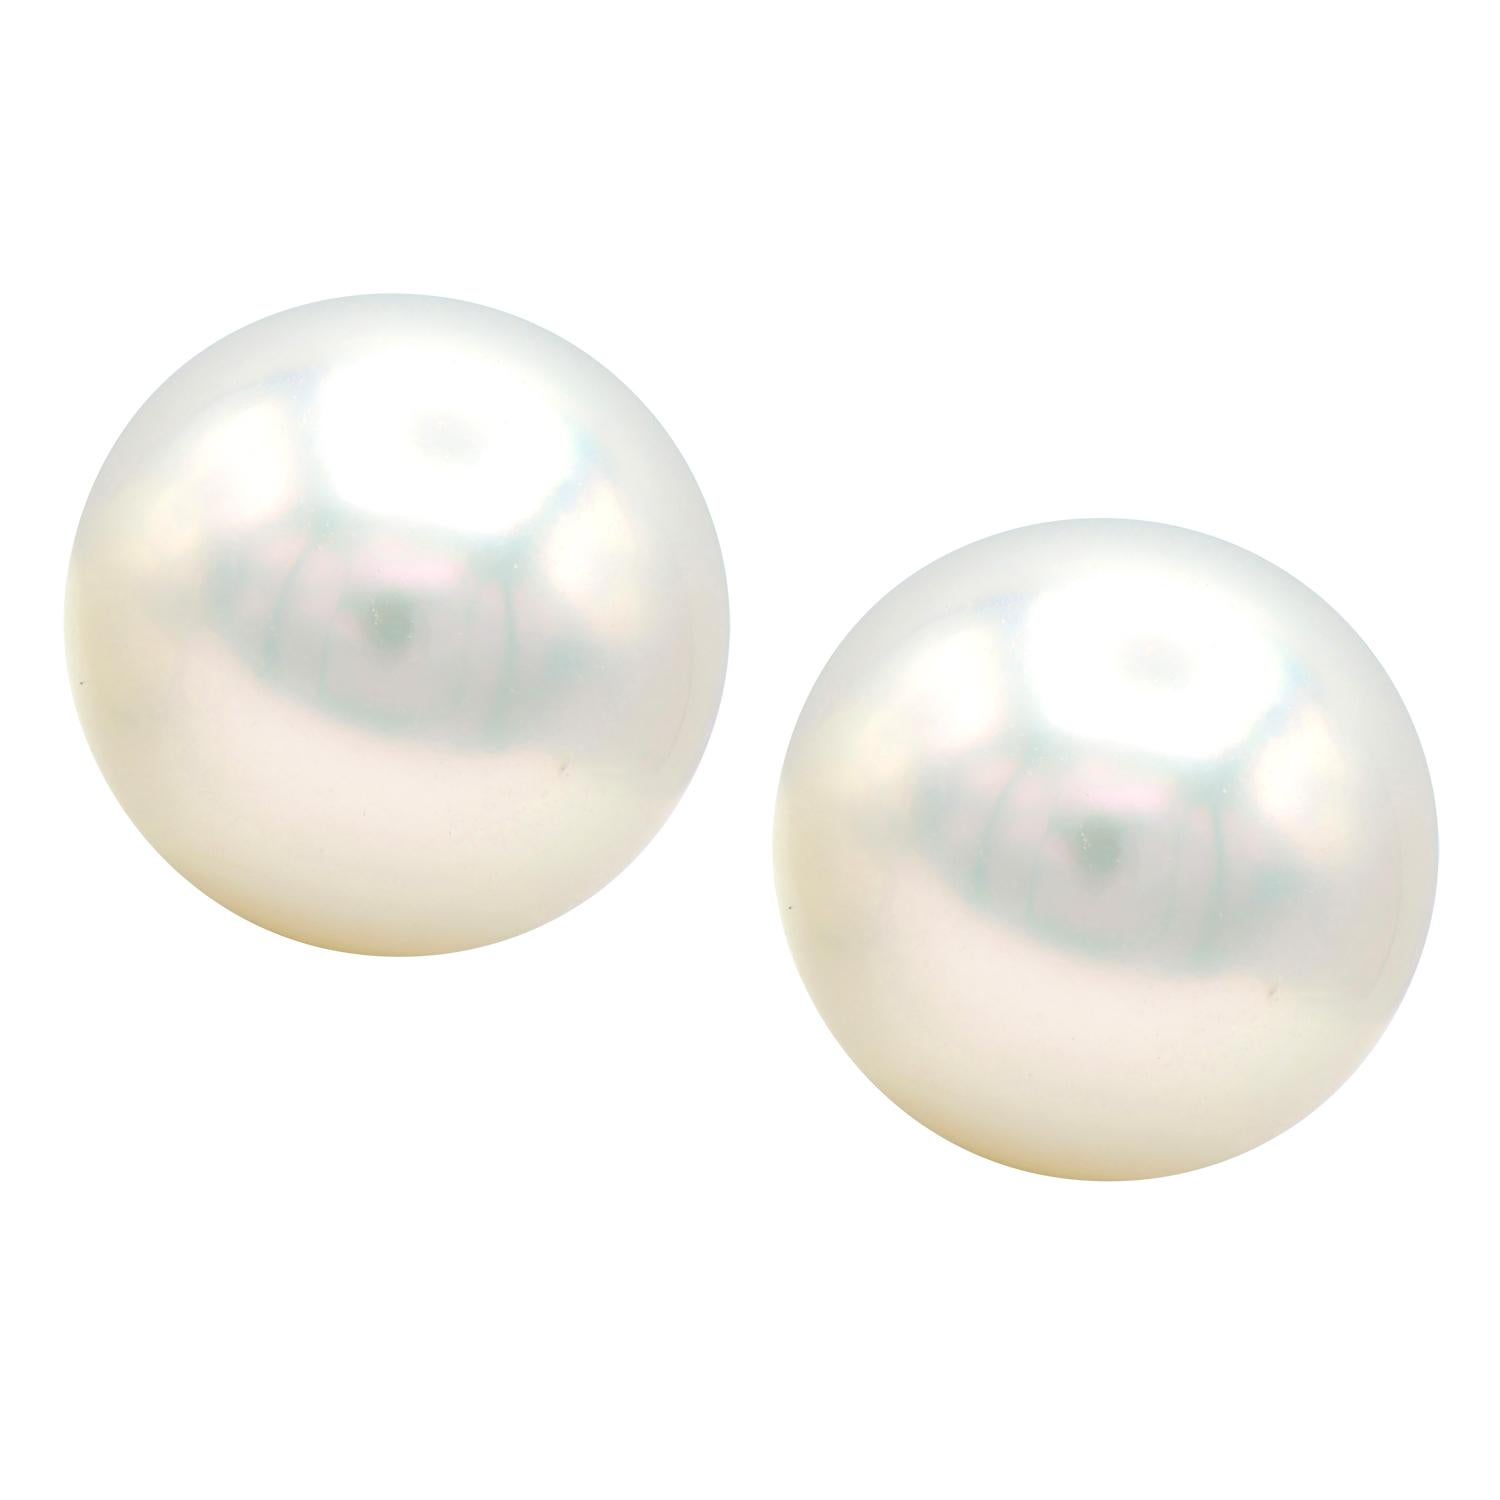 Freshwater Cultured Pearl Stud Earrings are a classic and timeless piece of jewelry that should be owned by everyone. Freshwater studs are slightly larger than Cultured Akoya pearl studs for a bigger more sophisticated look. These 9.5-10mm